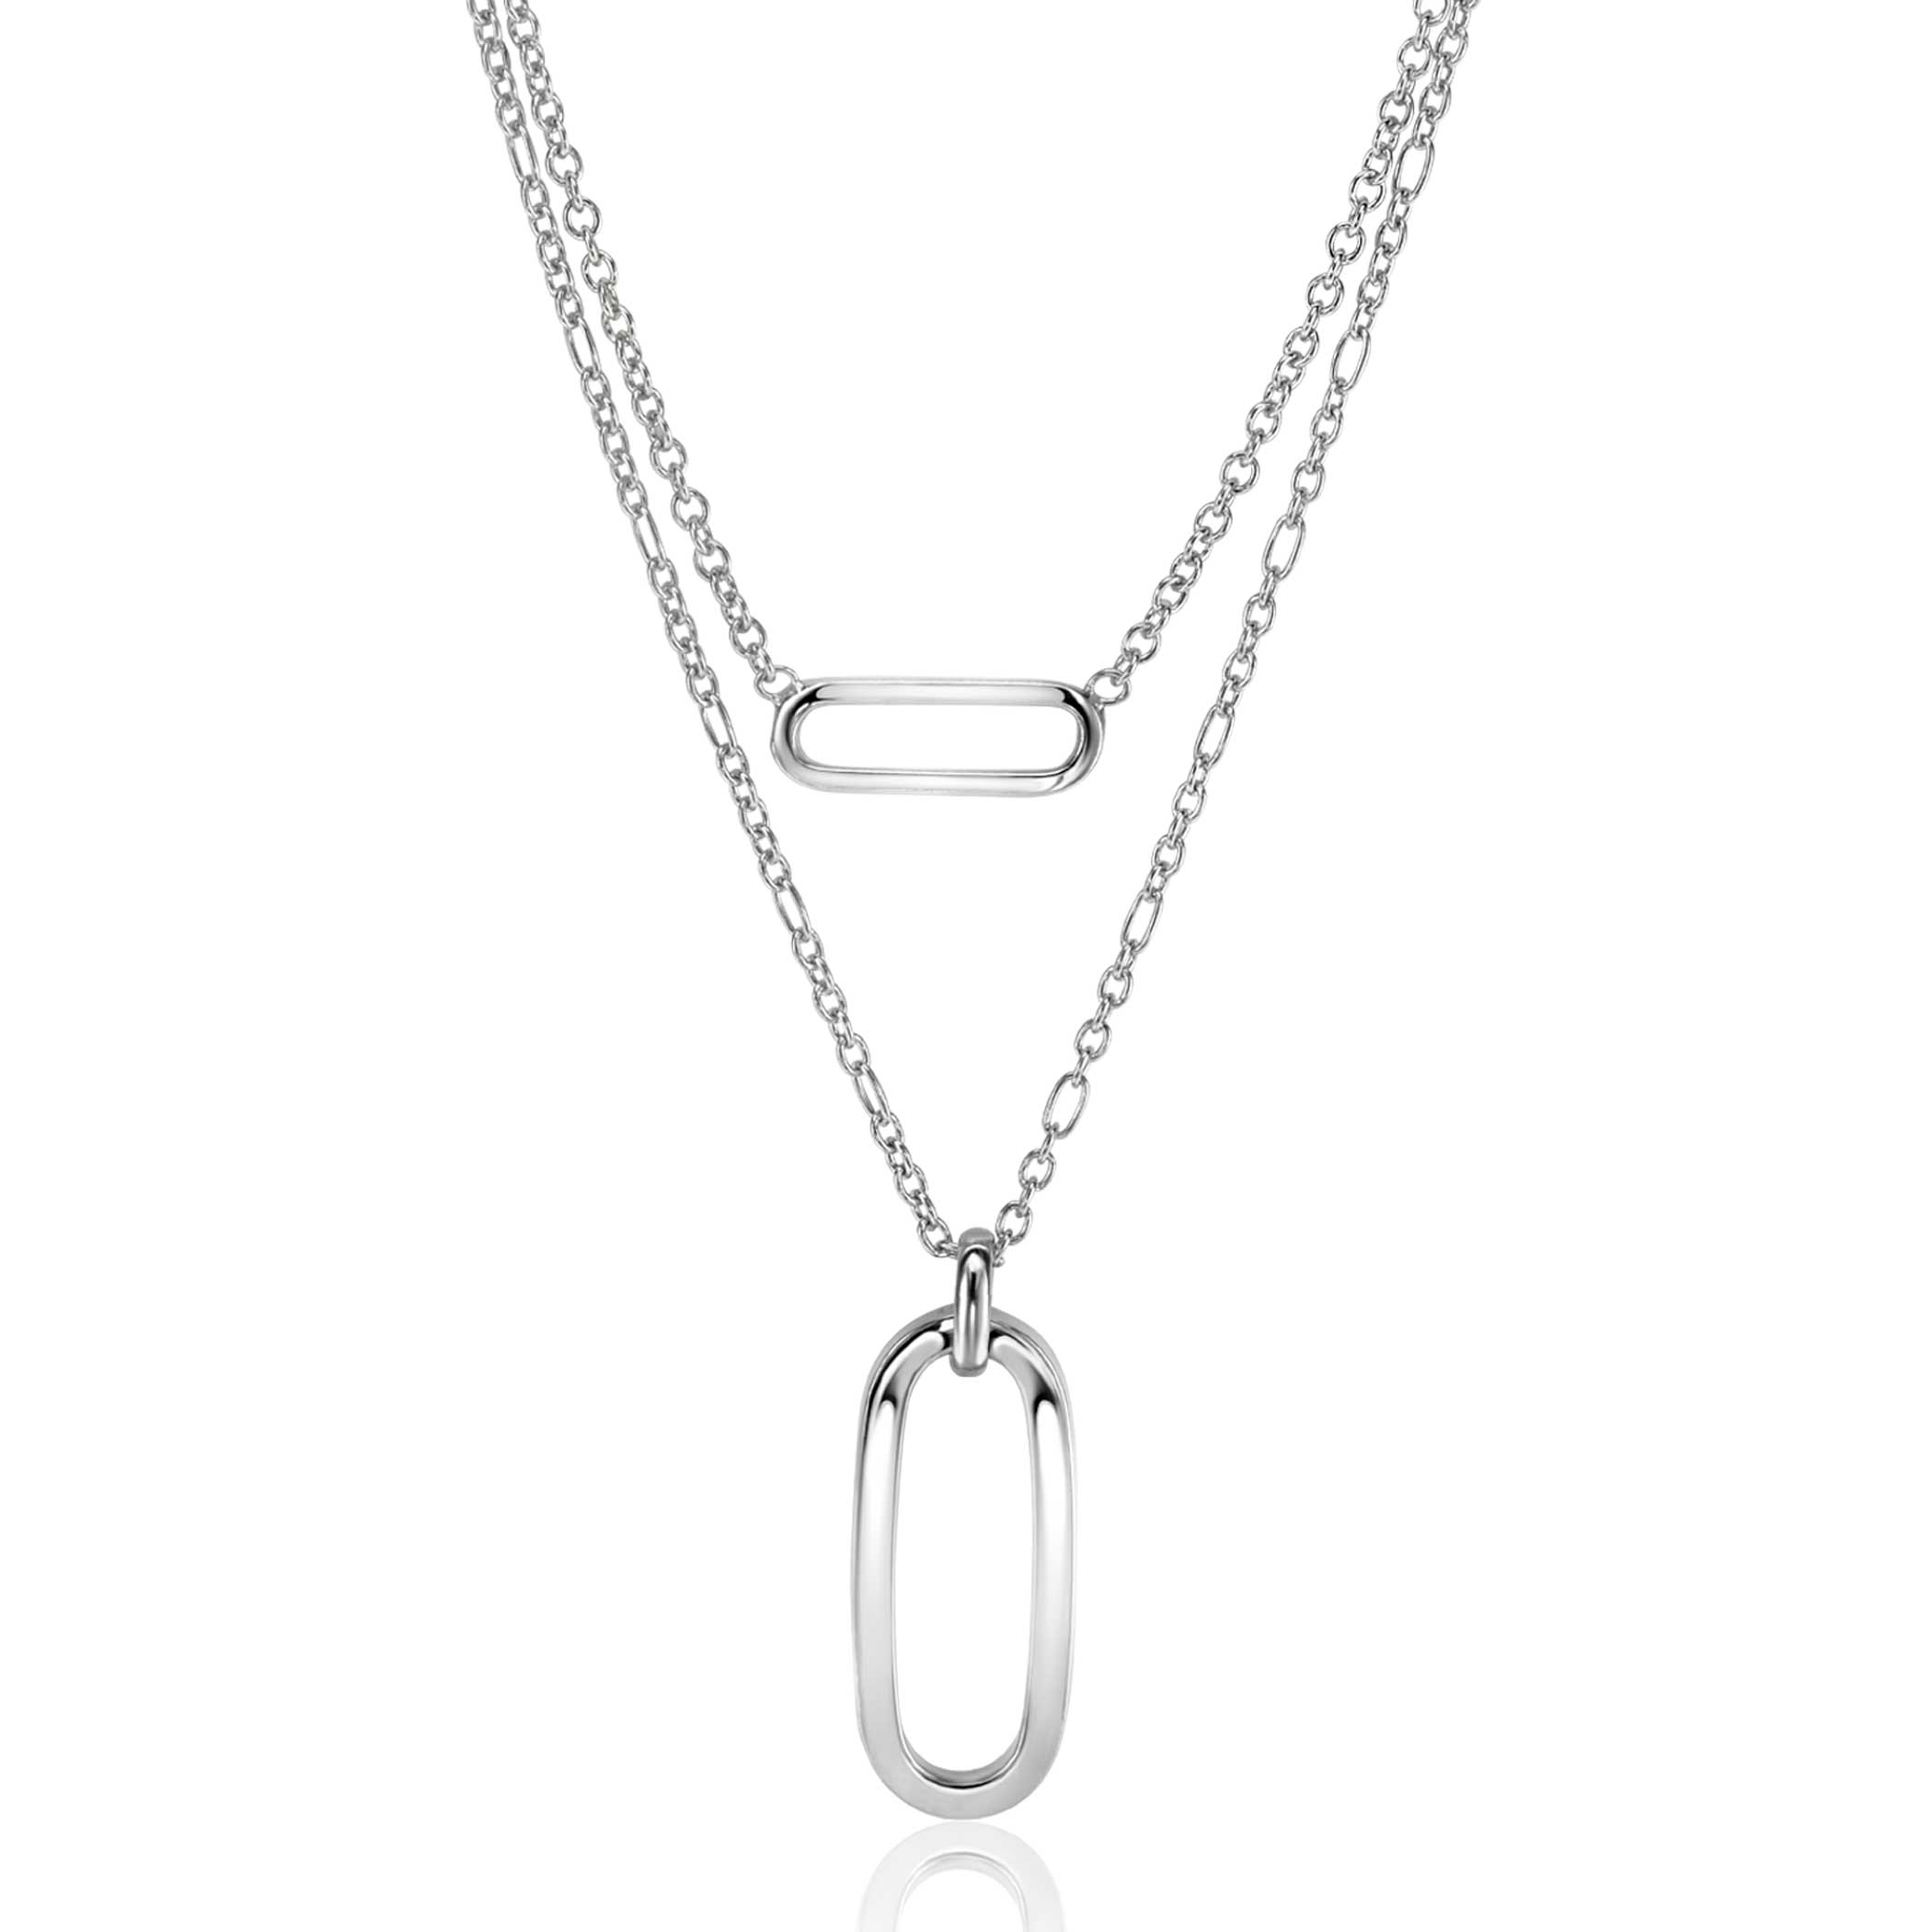 ZINZI Sterling Silver Multi-look Necklace 43cm Figaro and Rolo Chains with Open Oval Pendants ZIC2534